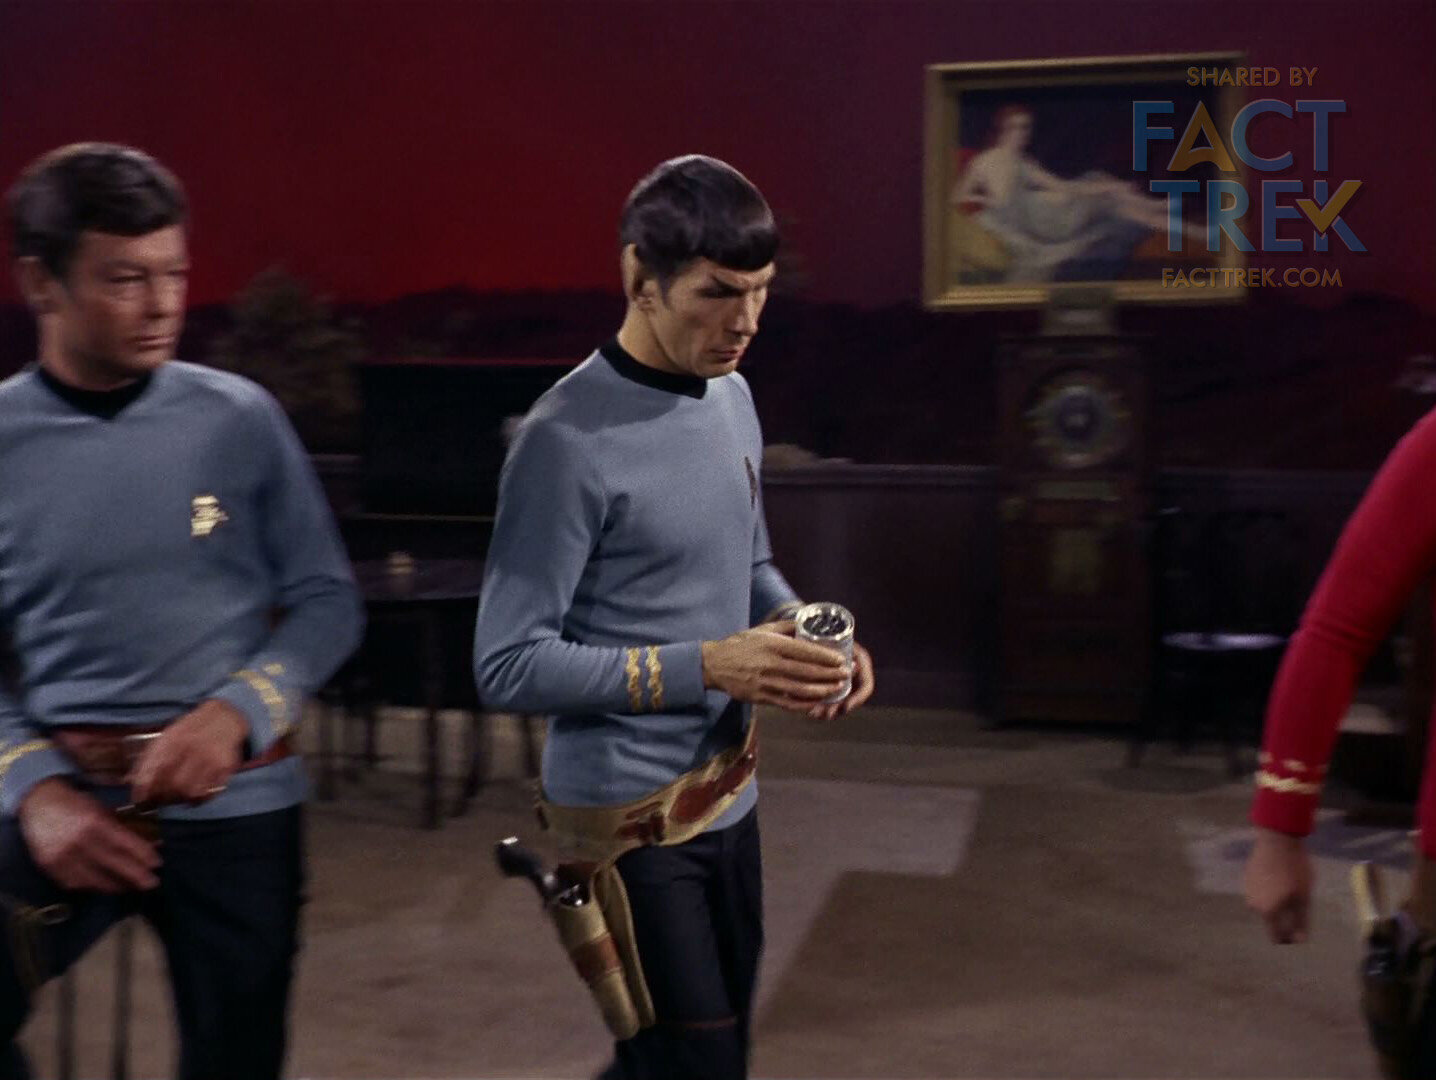 BIBLIO  Fun with Kirk and Spock: Watch Kirk and Spock Go Boldly